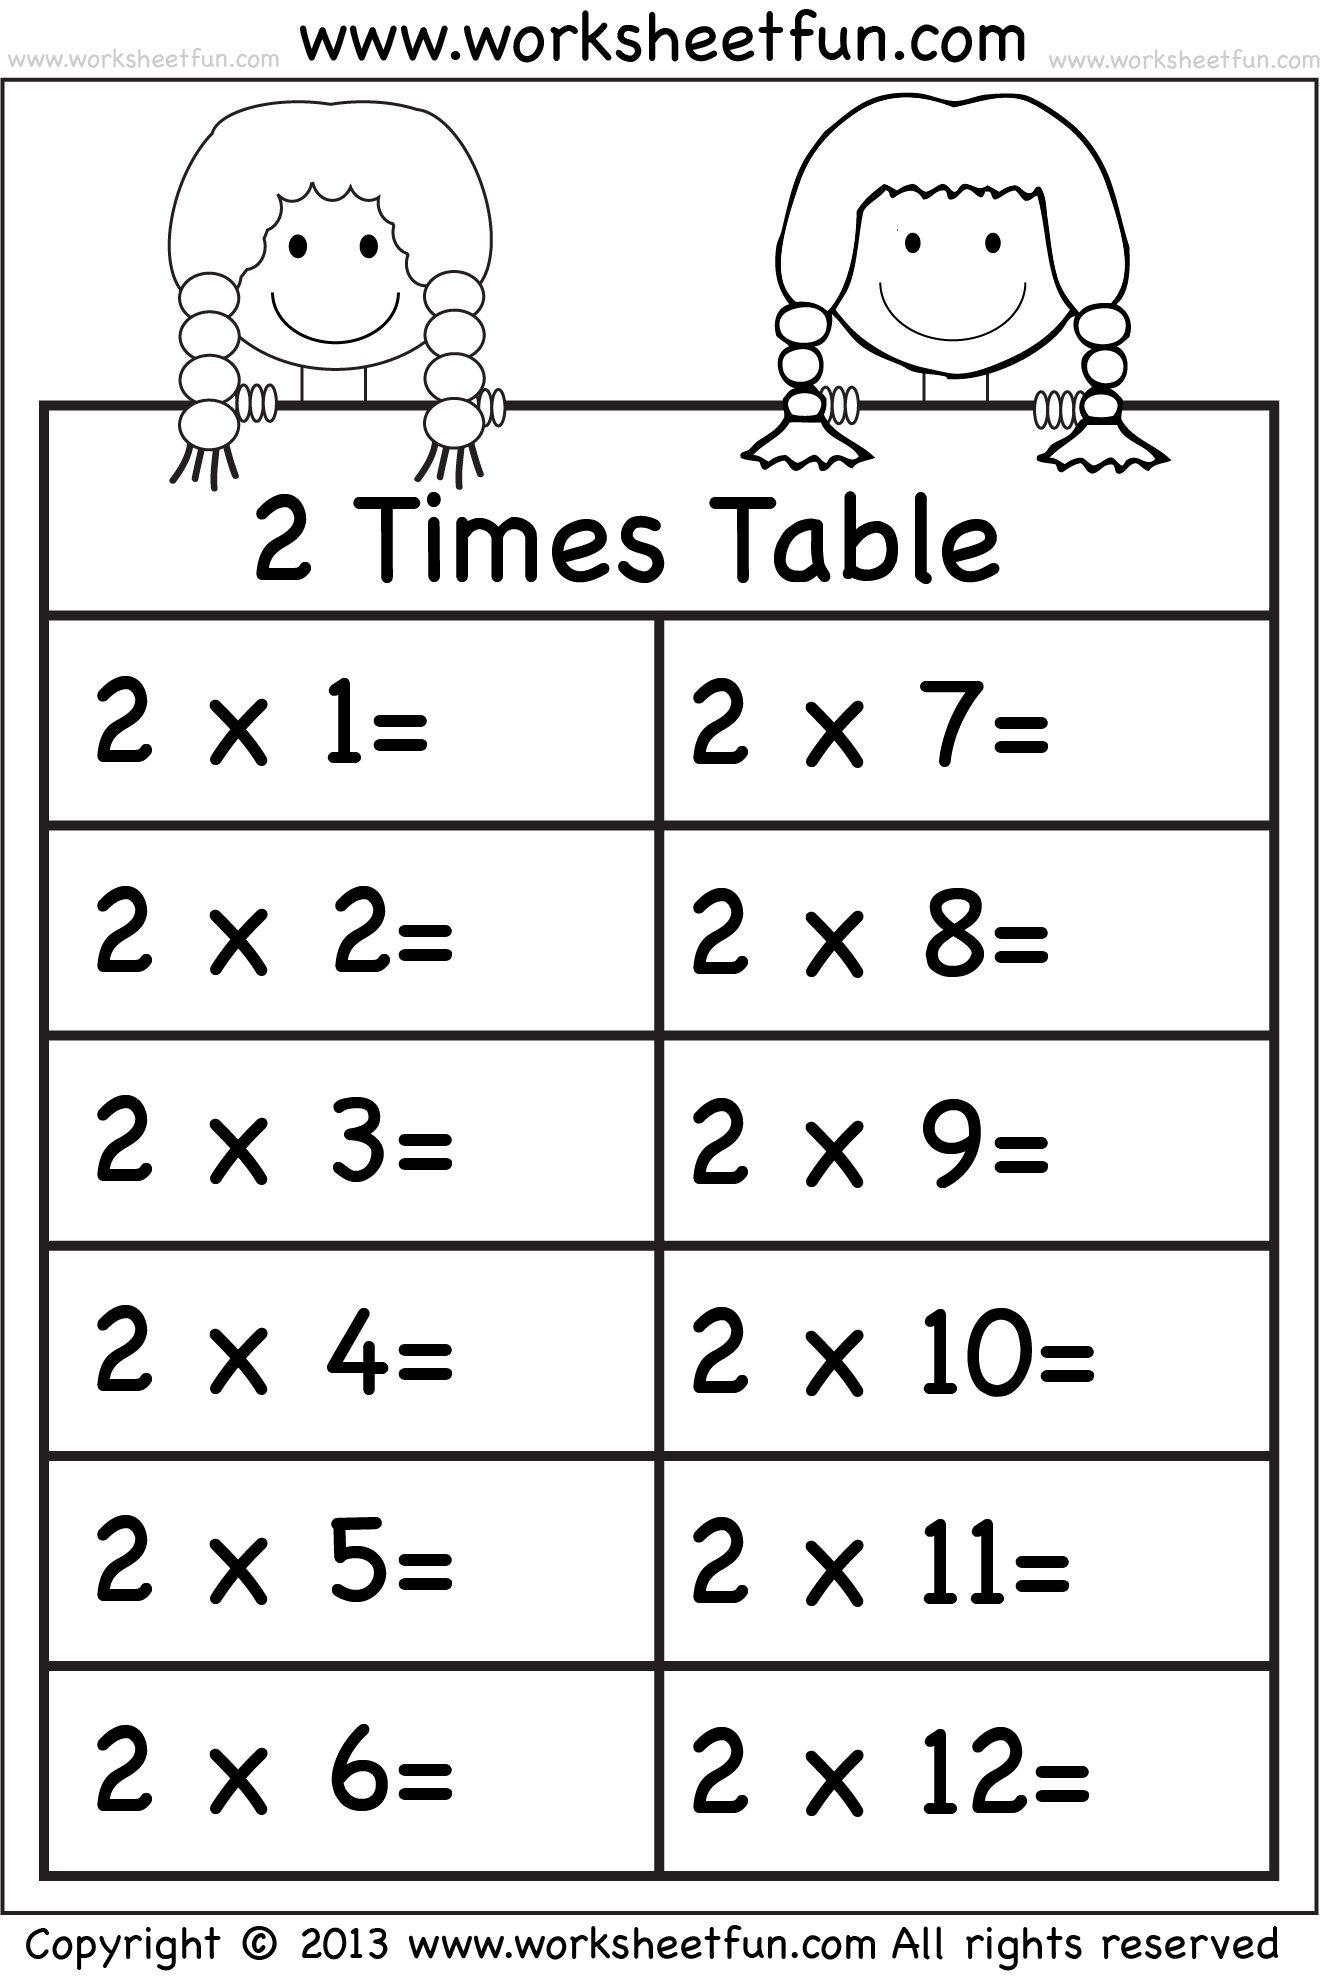 Times Tables Worksheets - 2, 3, 4, 5, 6, 7, 8, 9, 10, 11 ...